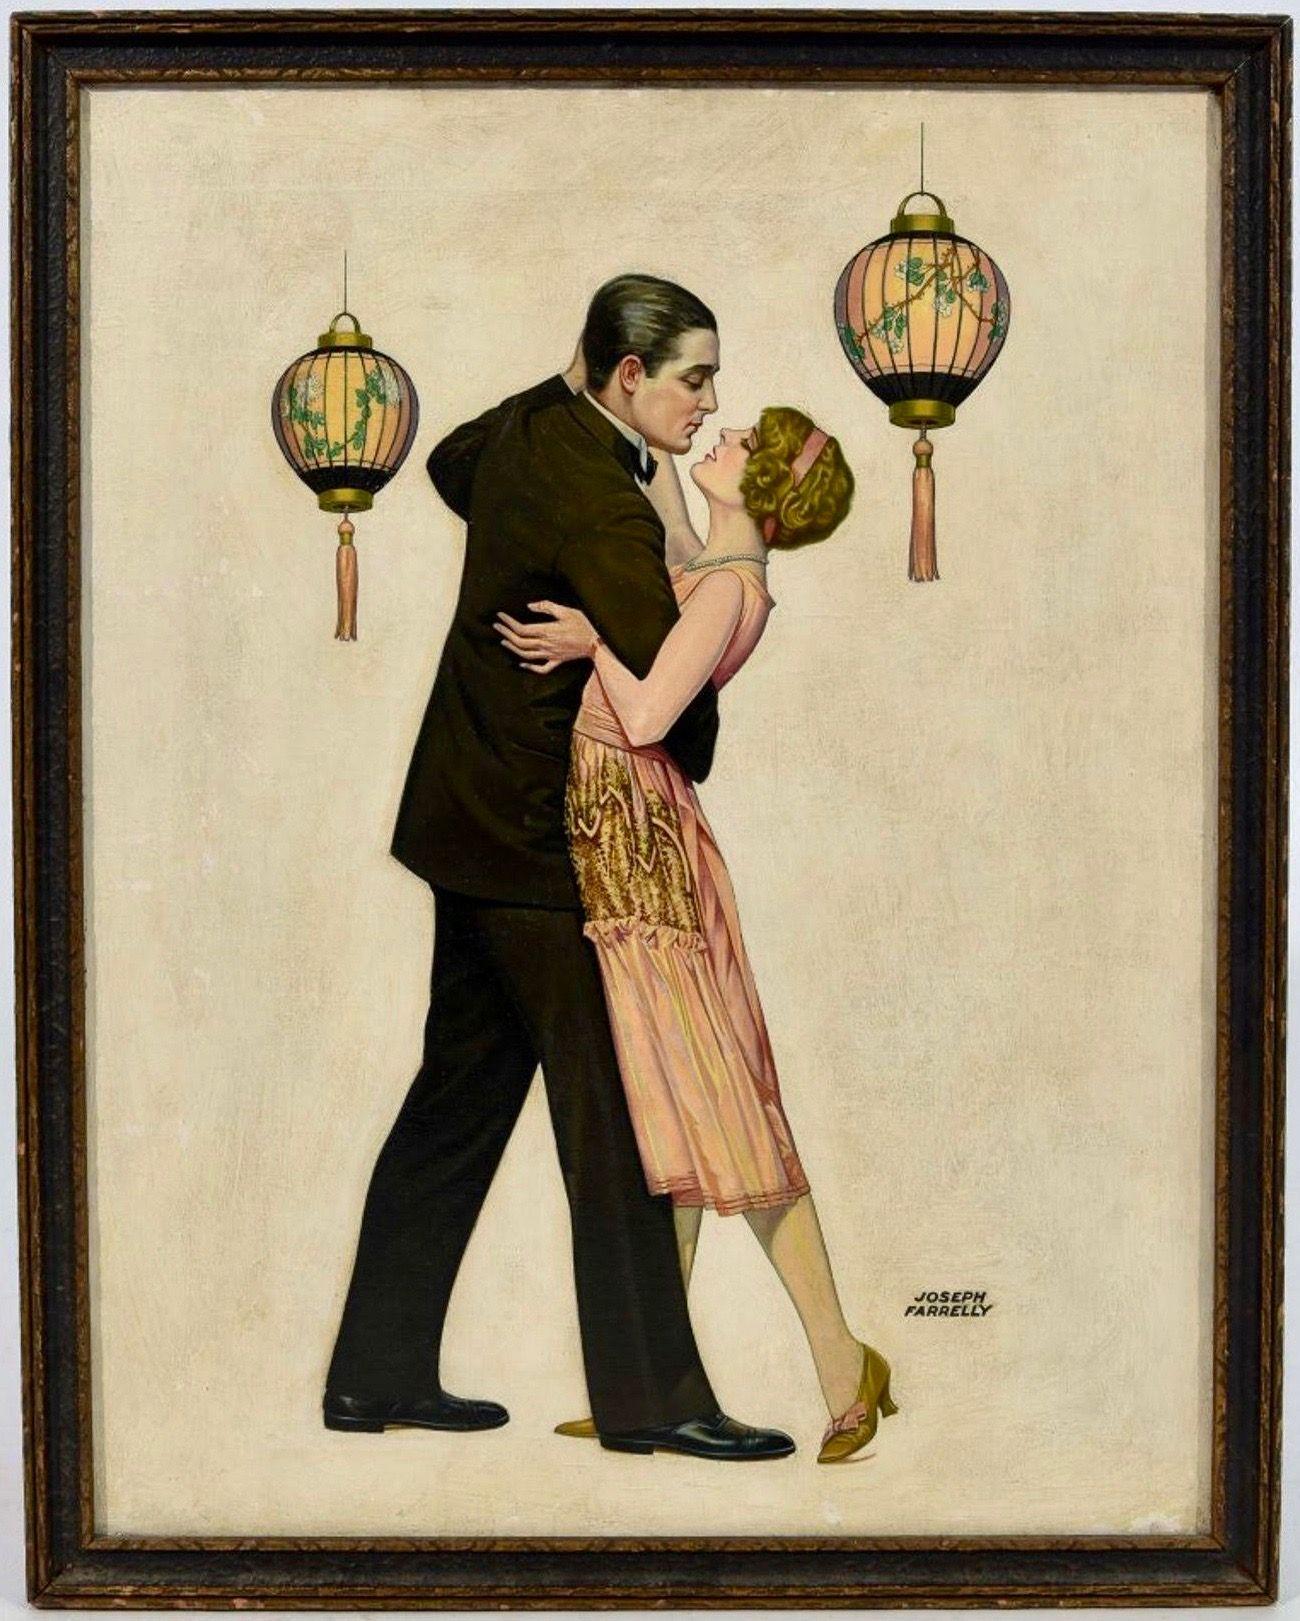  Couple Dancing, Liberty Magazine Cover, 1925 - Painting by Joseph Farrely